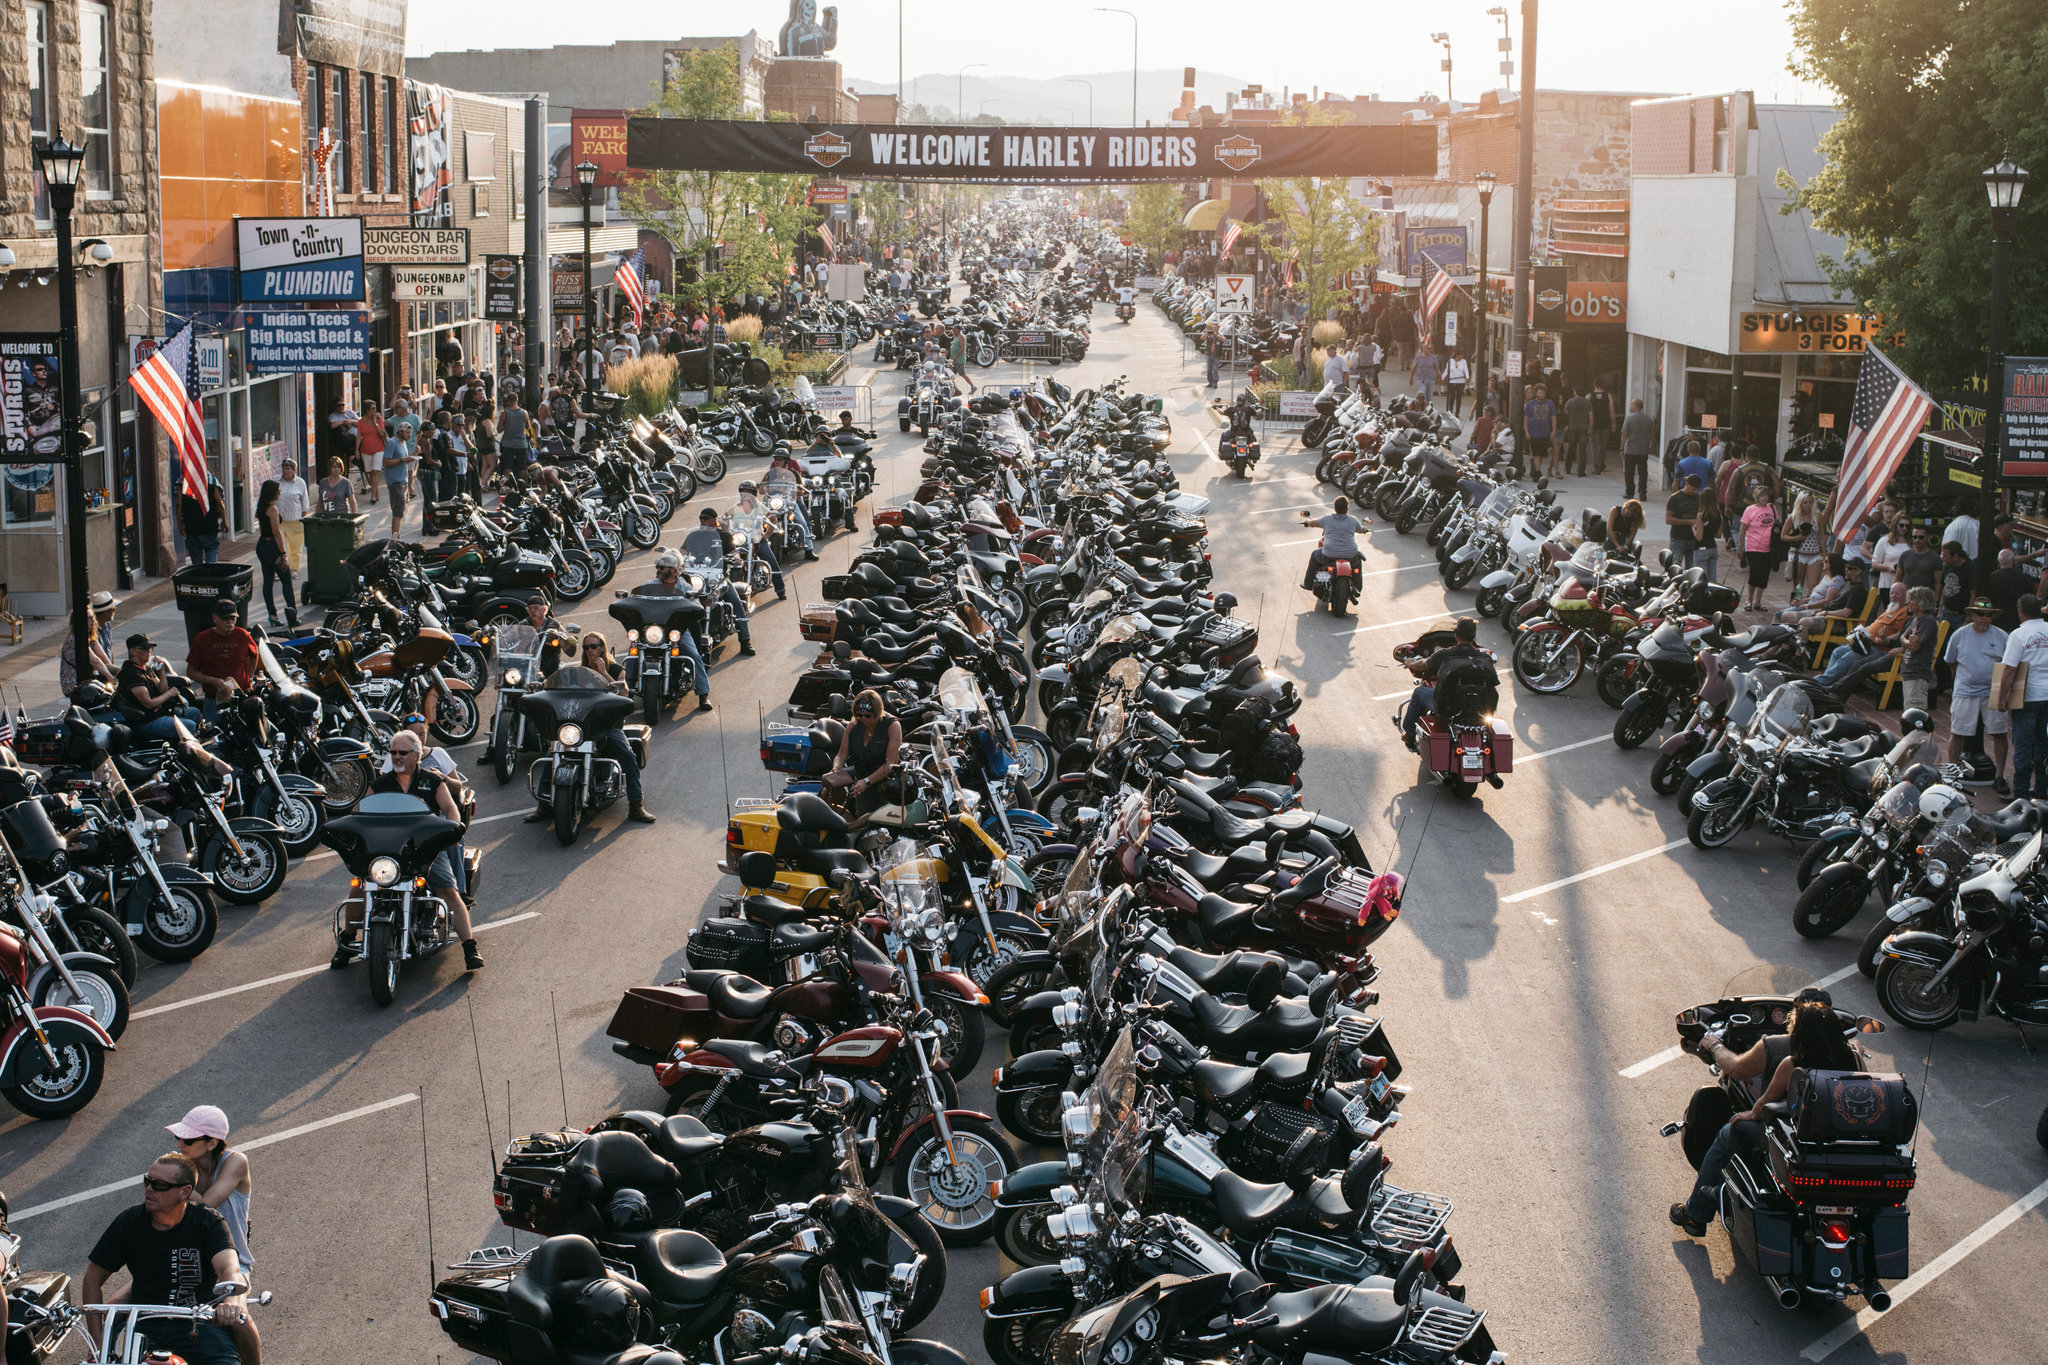 a view of the Harley Davidson Motorcycle rally in 2021